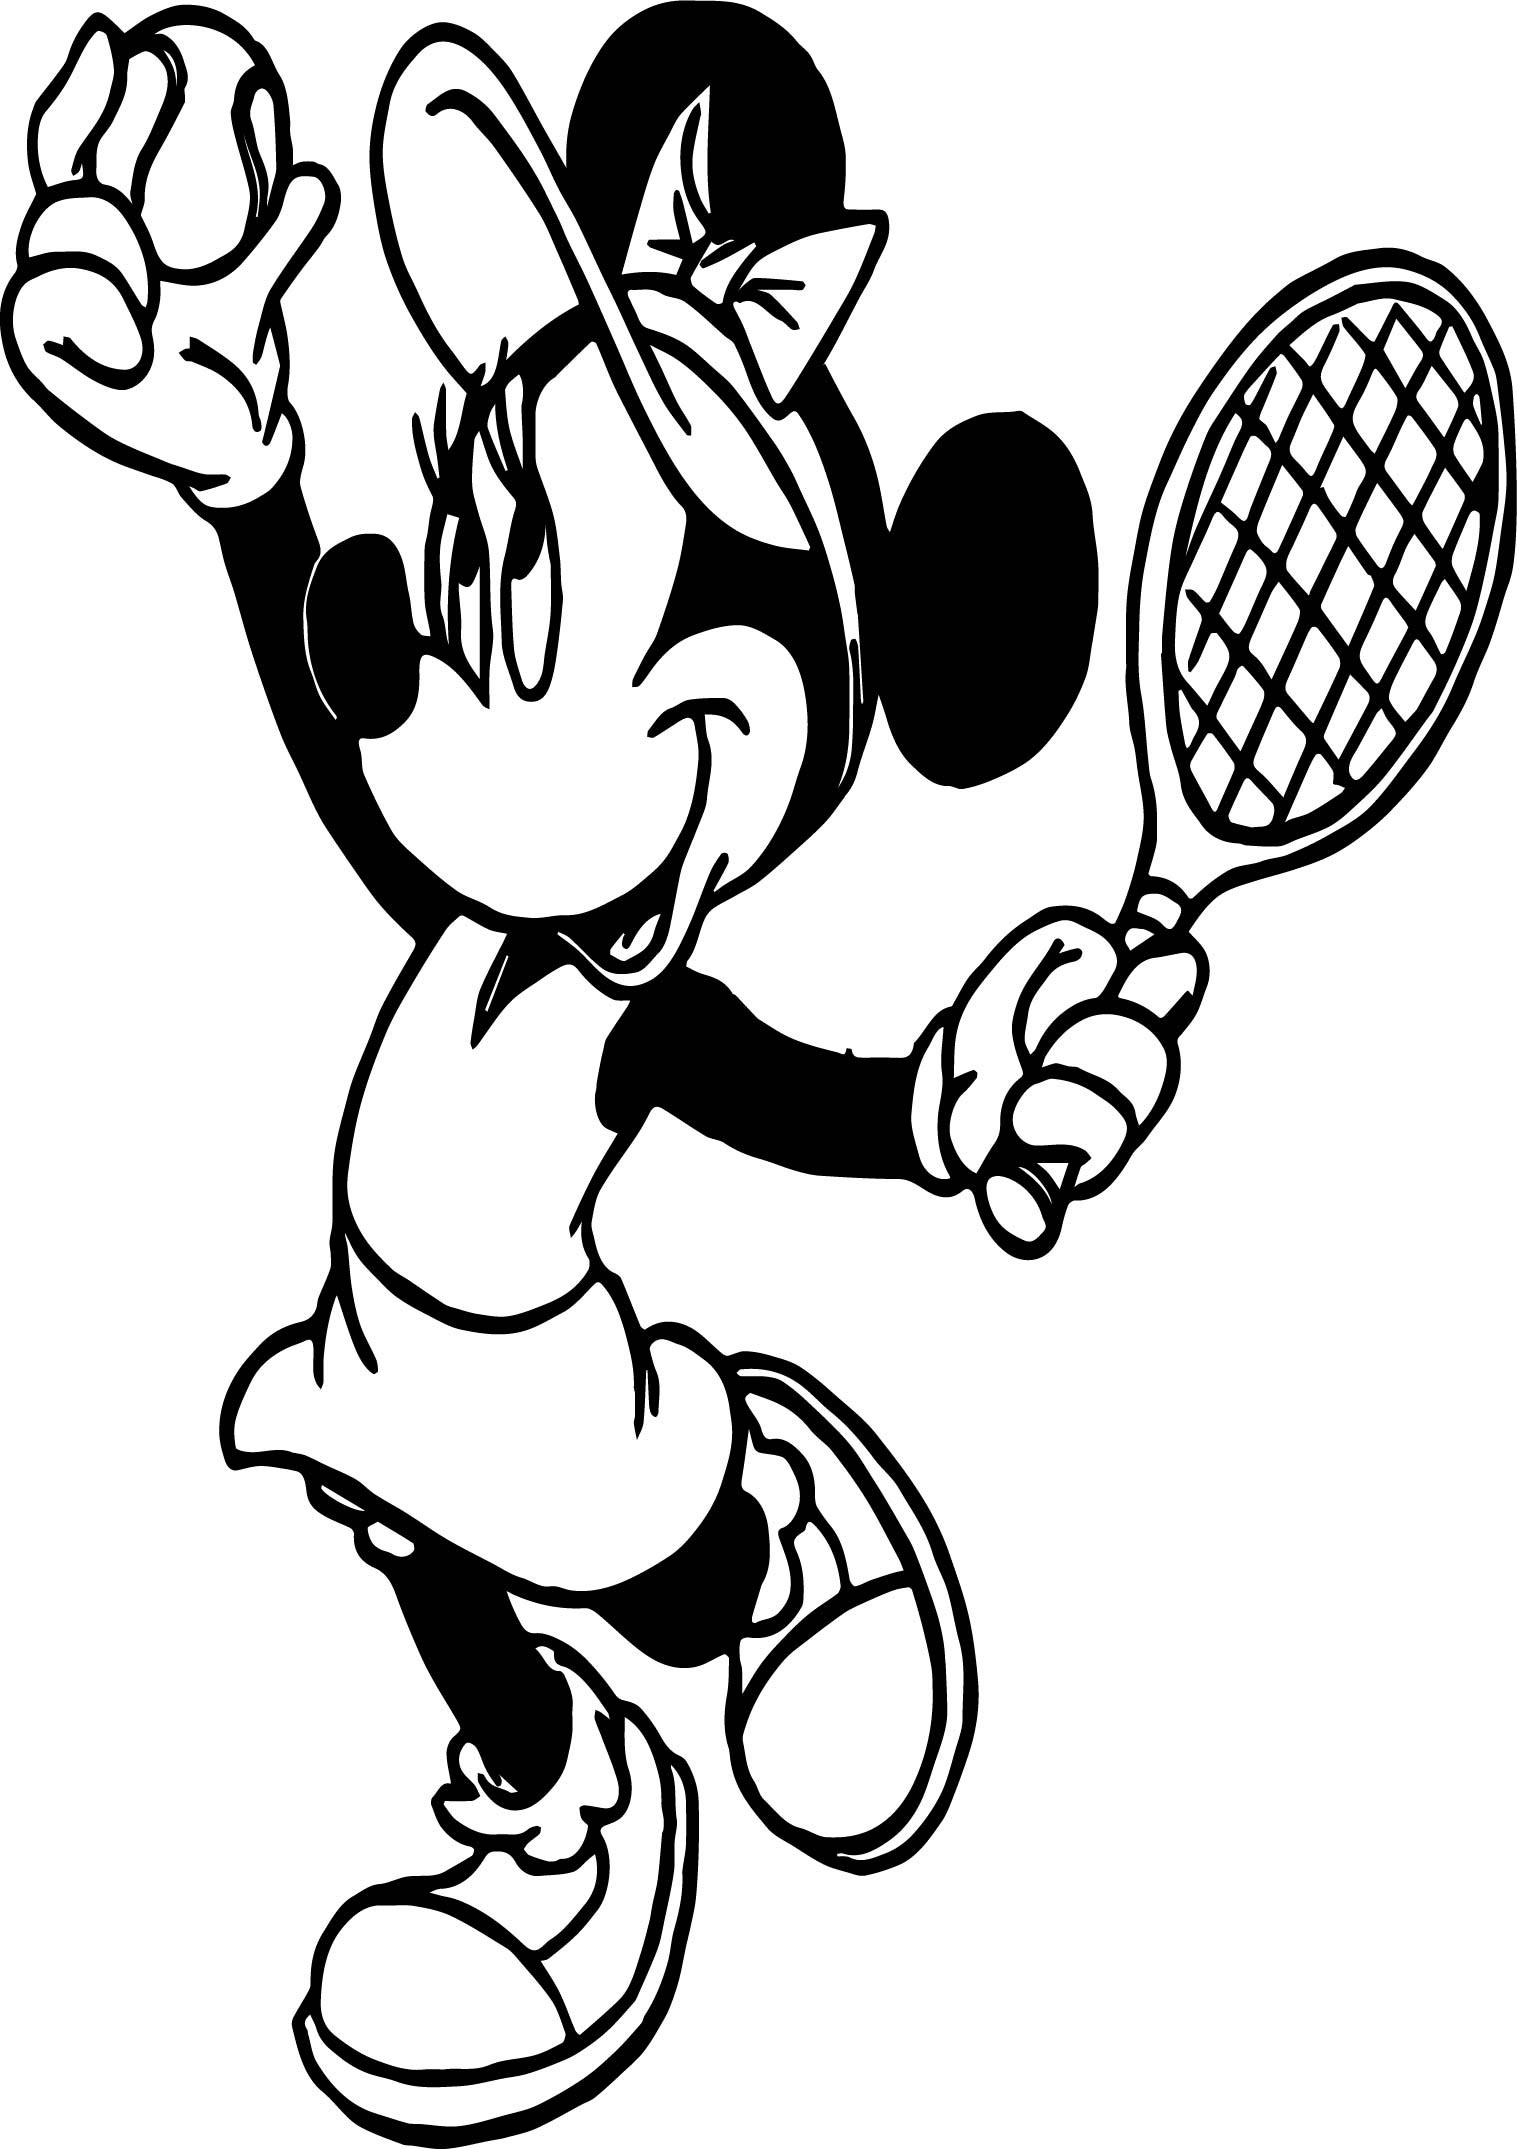 Minnie Mouse Playing Tennis